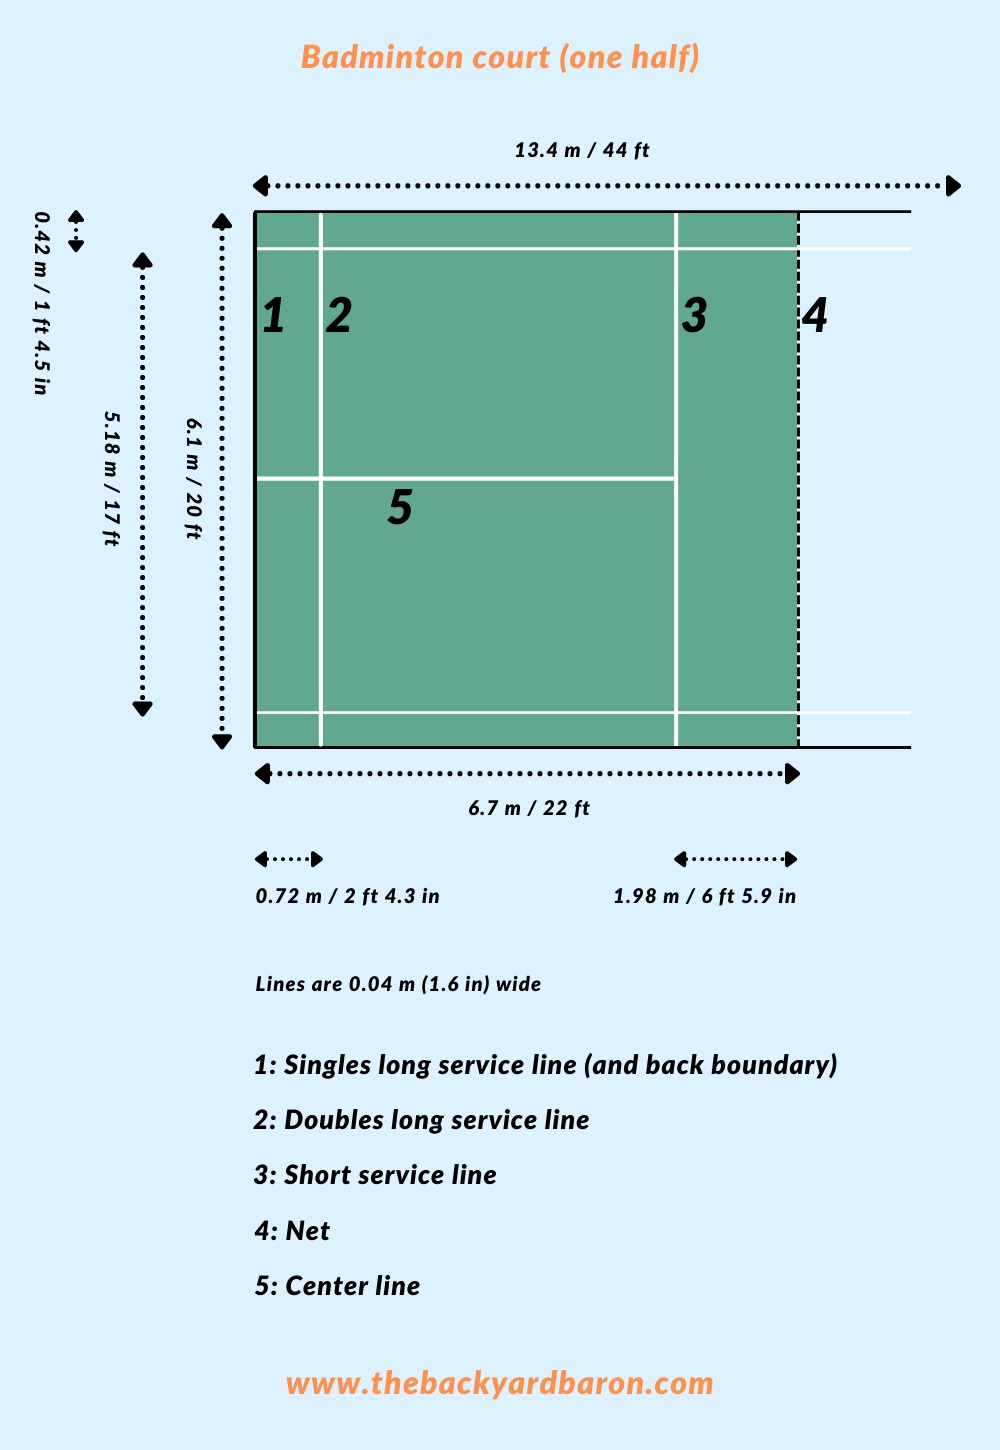 Diagram of badminton court with dimensions